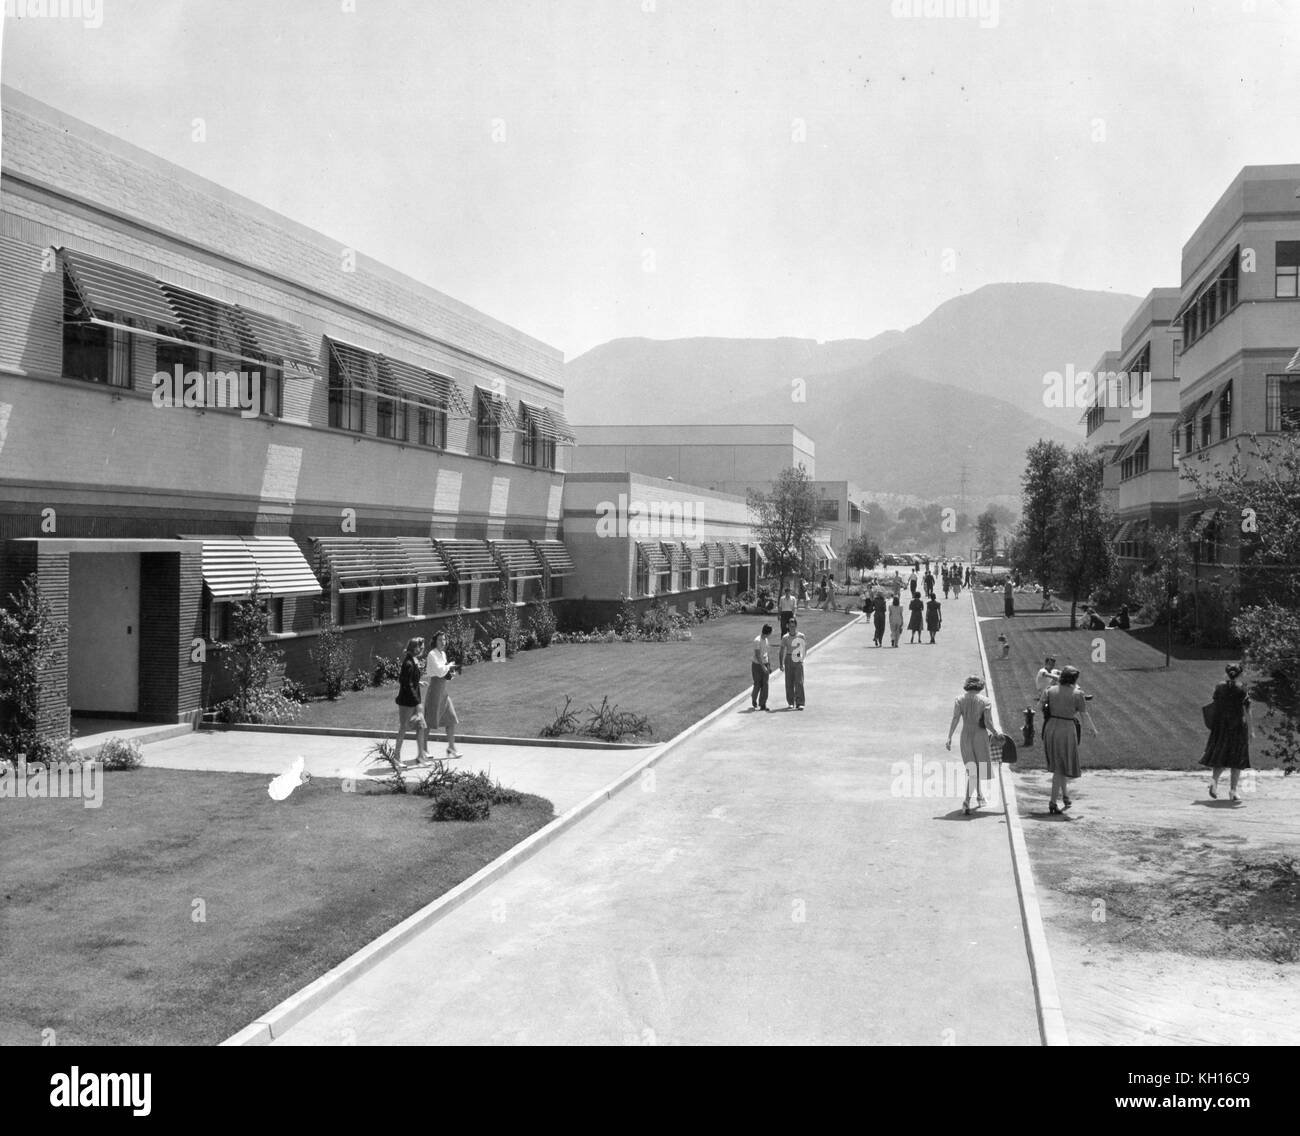 Photo looking down Disney Studios' Minnie Mouse Boulevard with several wings of the Animation Building shown on the right, the Inking and Painting, Production Camera and Cutting departments on the left and Publicity and Live-Action Buildings in the background, Burbank, CA 1943. Stock Photo